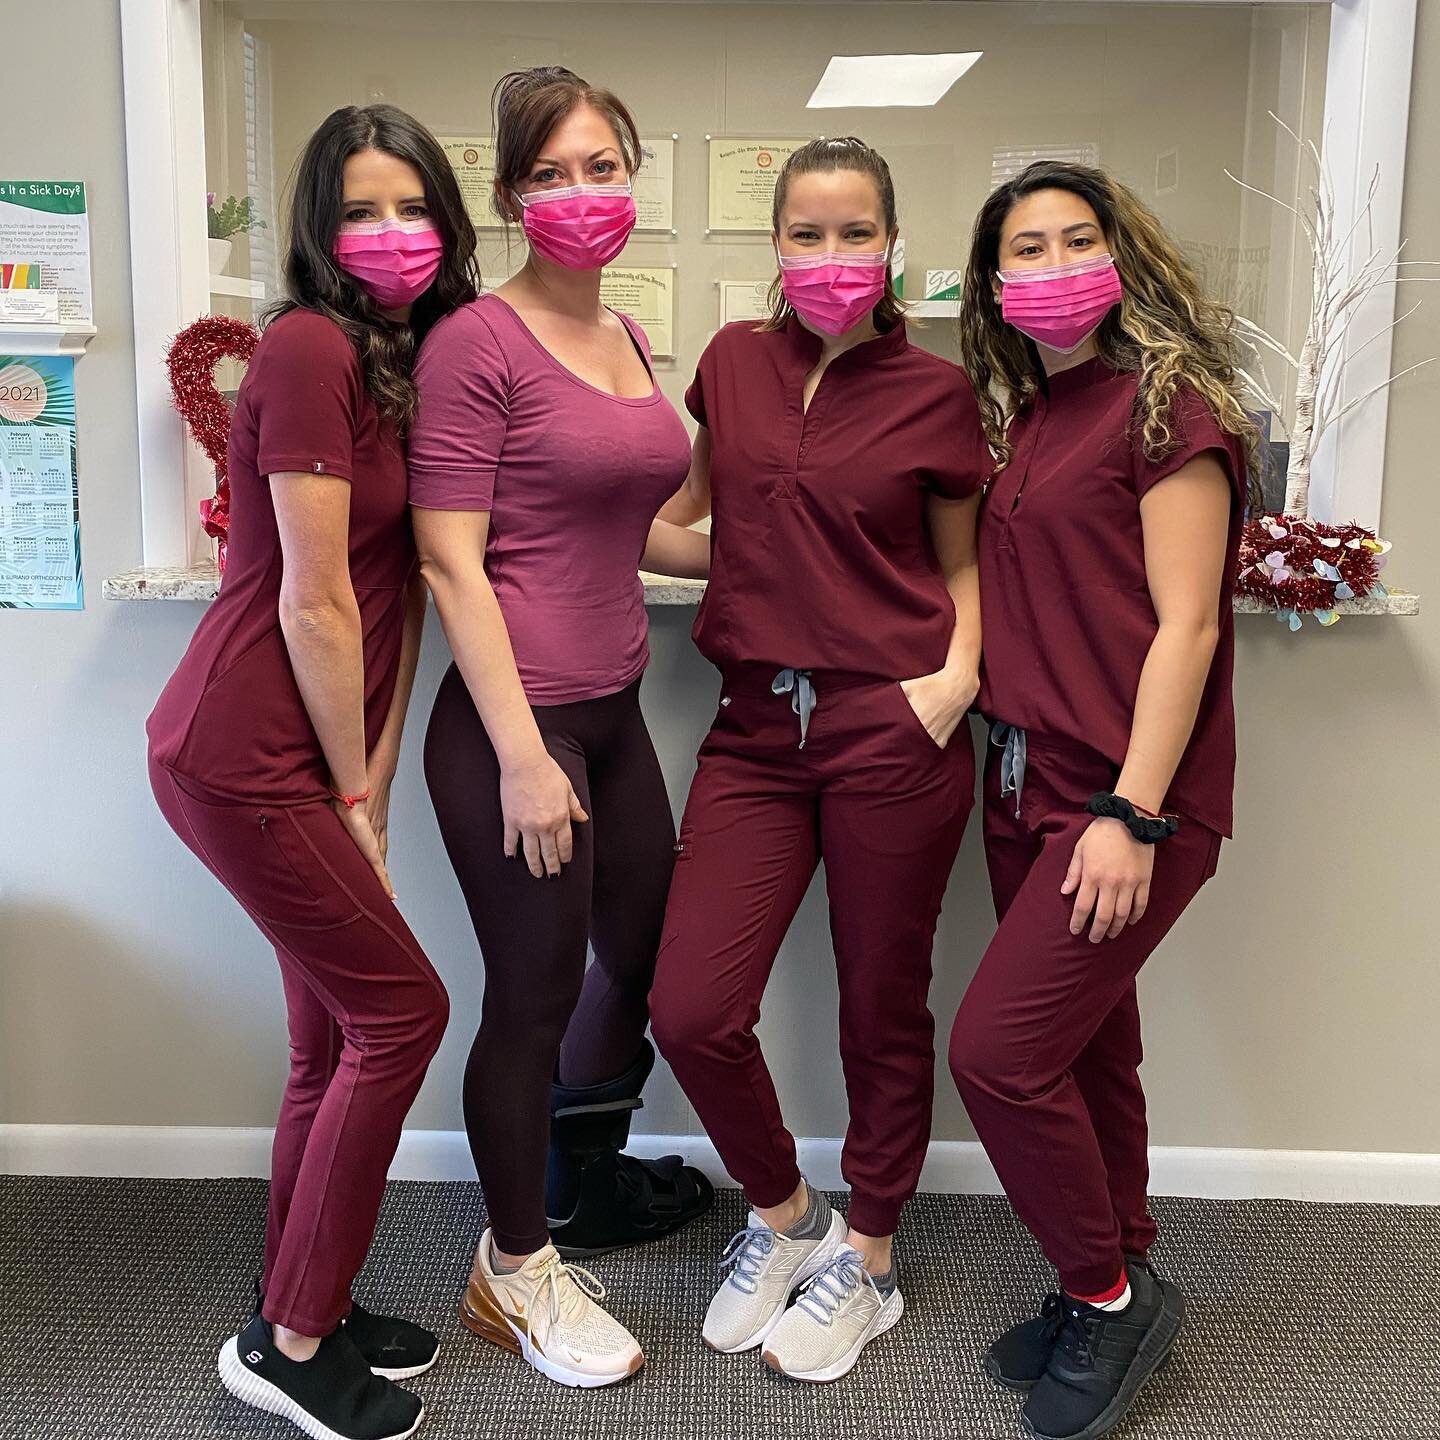 Roses are red, violets are blue, We brush our teeth and you should too! #love #valentines #nutleypediatricdentistry #npd #hollywoodsmiles